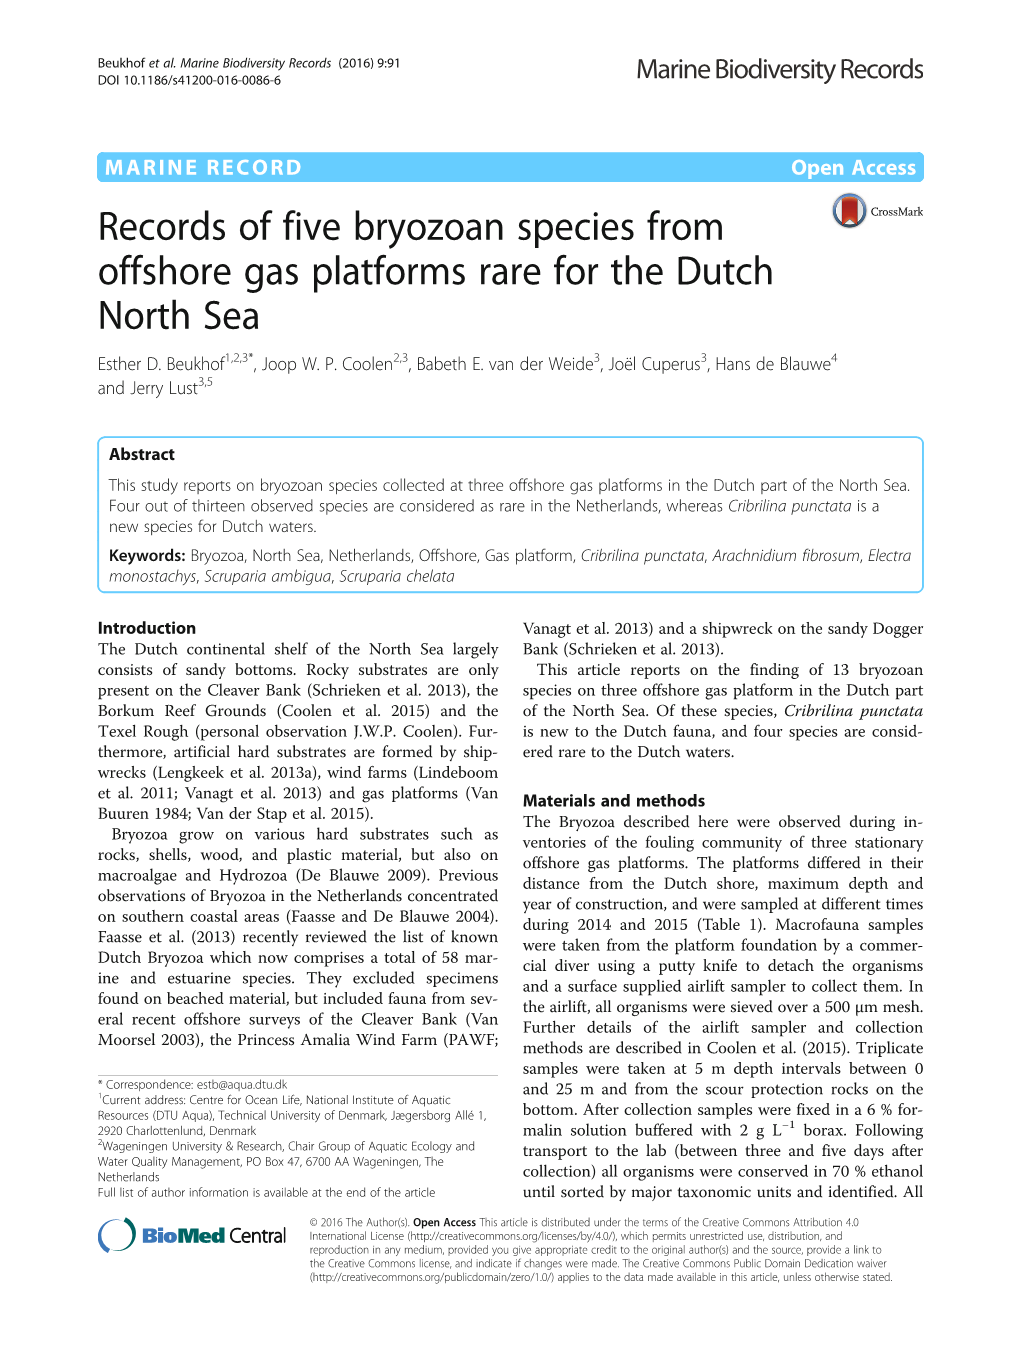 Records of Five Bryozoan Species from Offshore Gas Platforms Rare for the Dutch North Sea Esther D